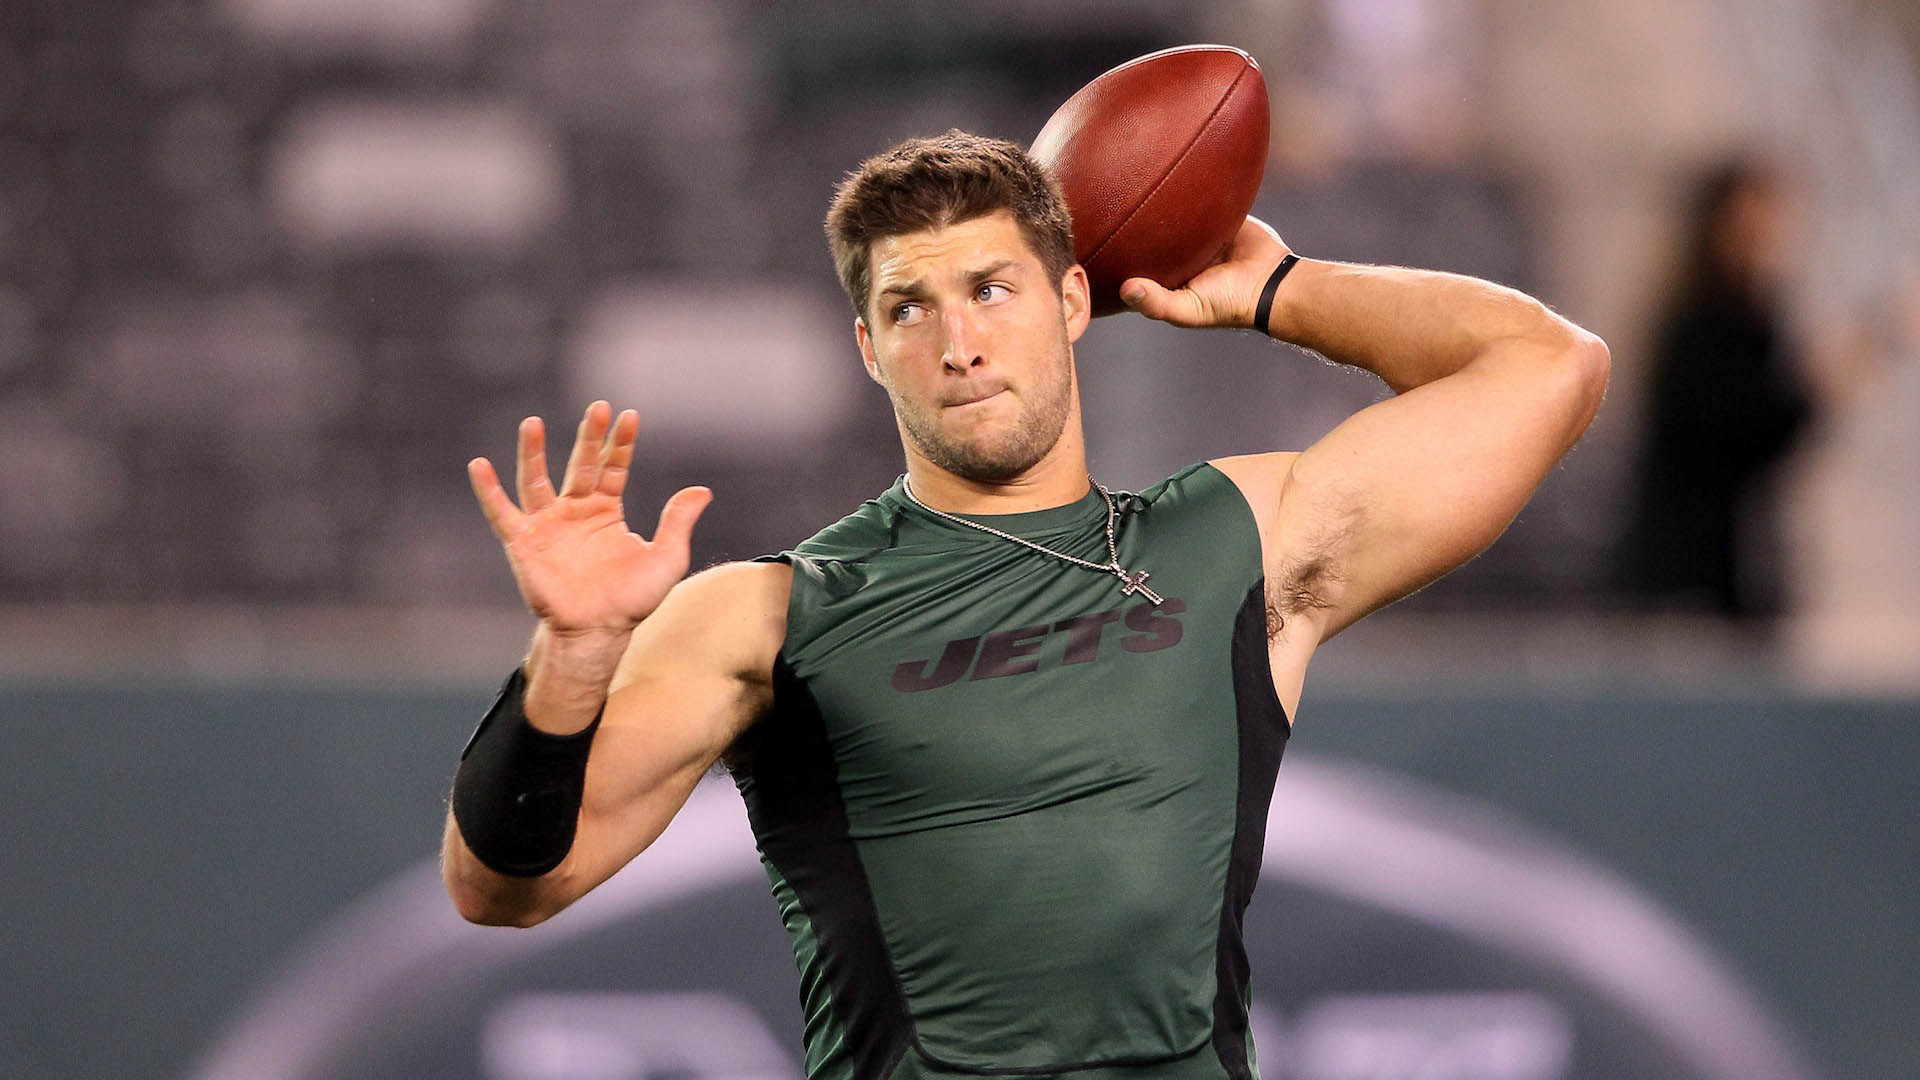 All Tim Tebow wallpapers.